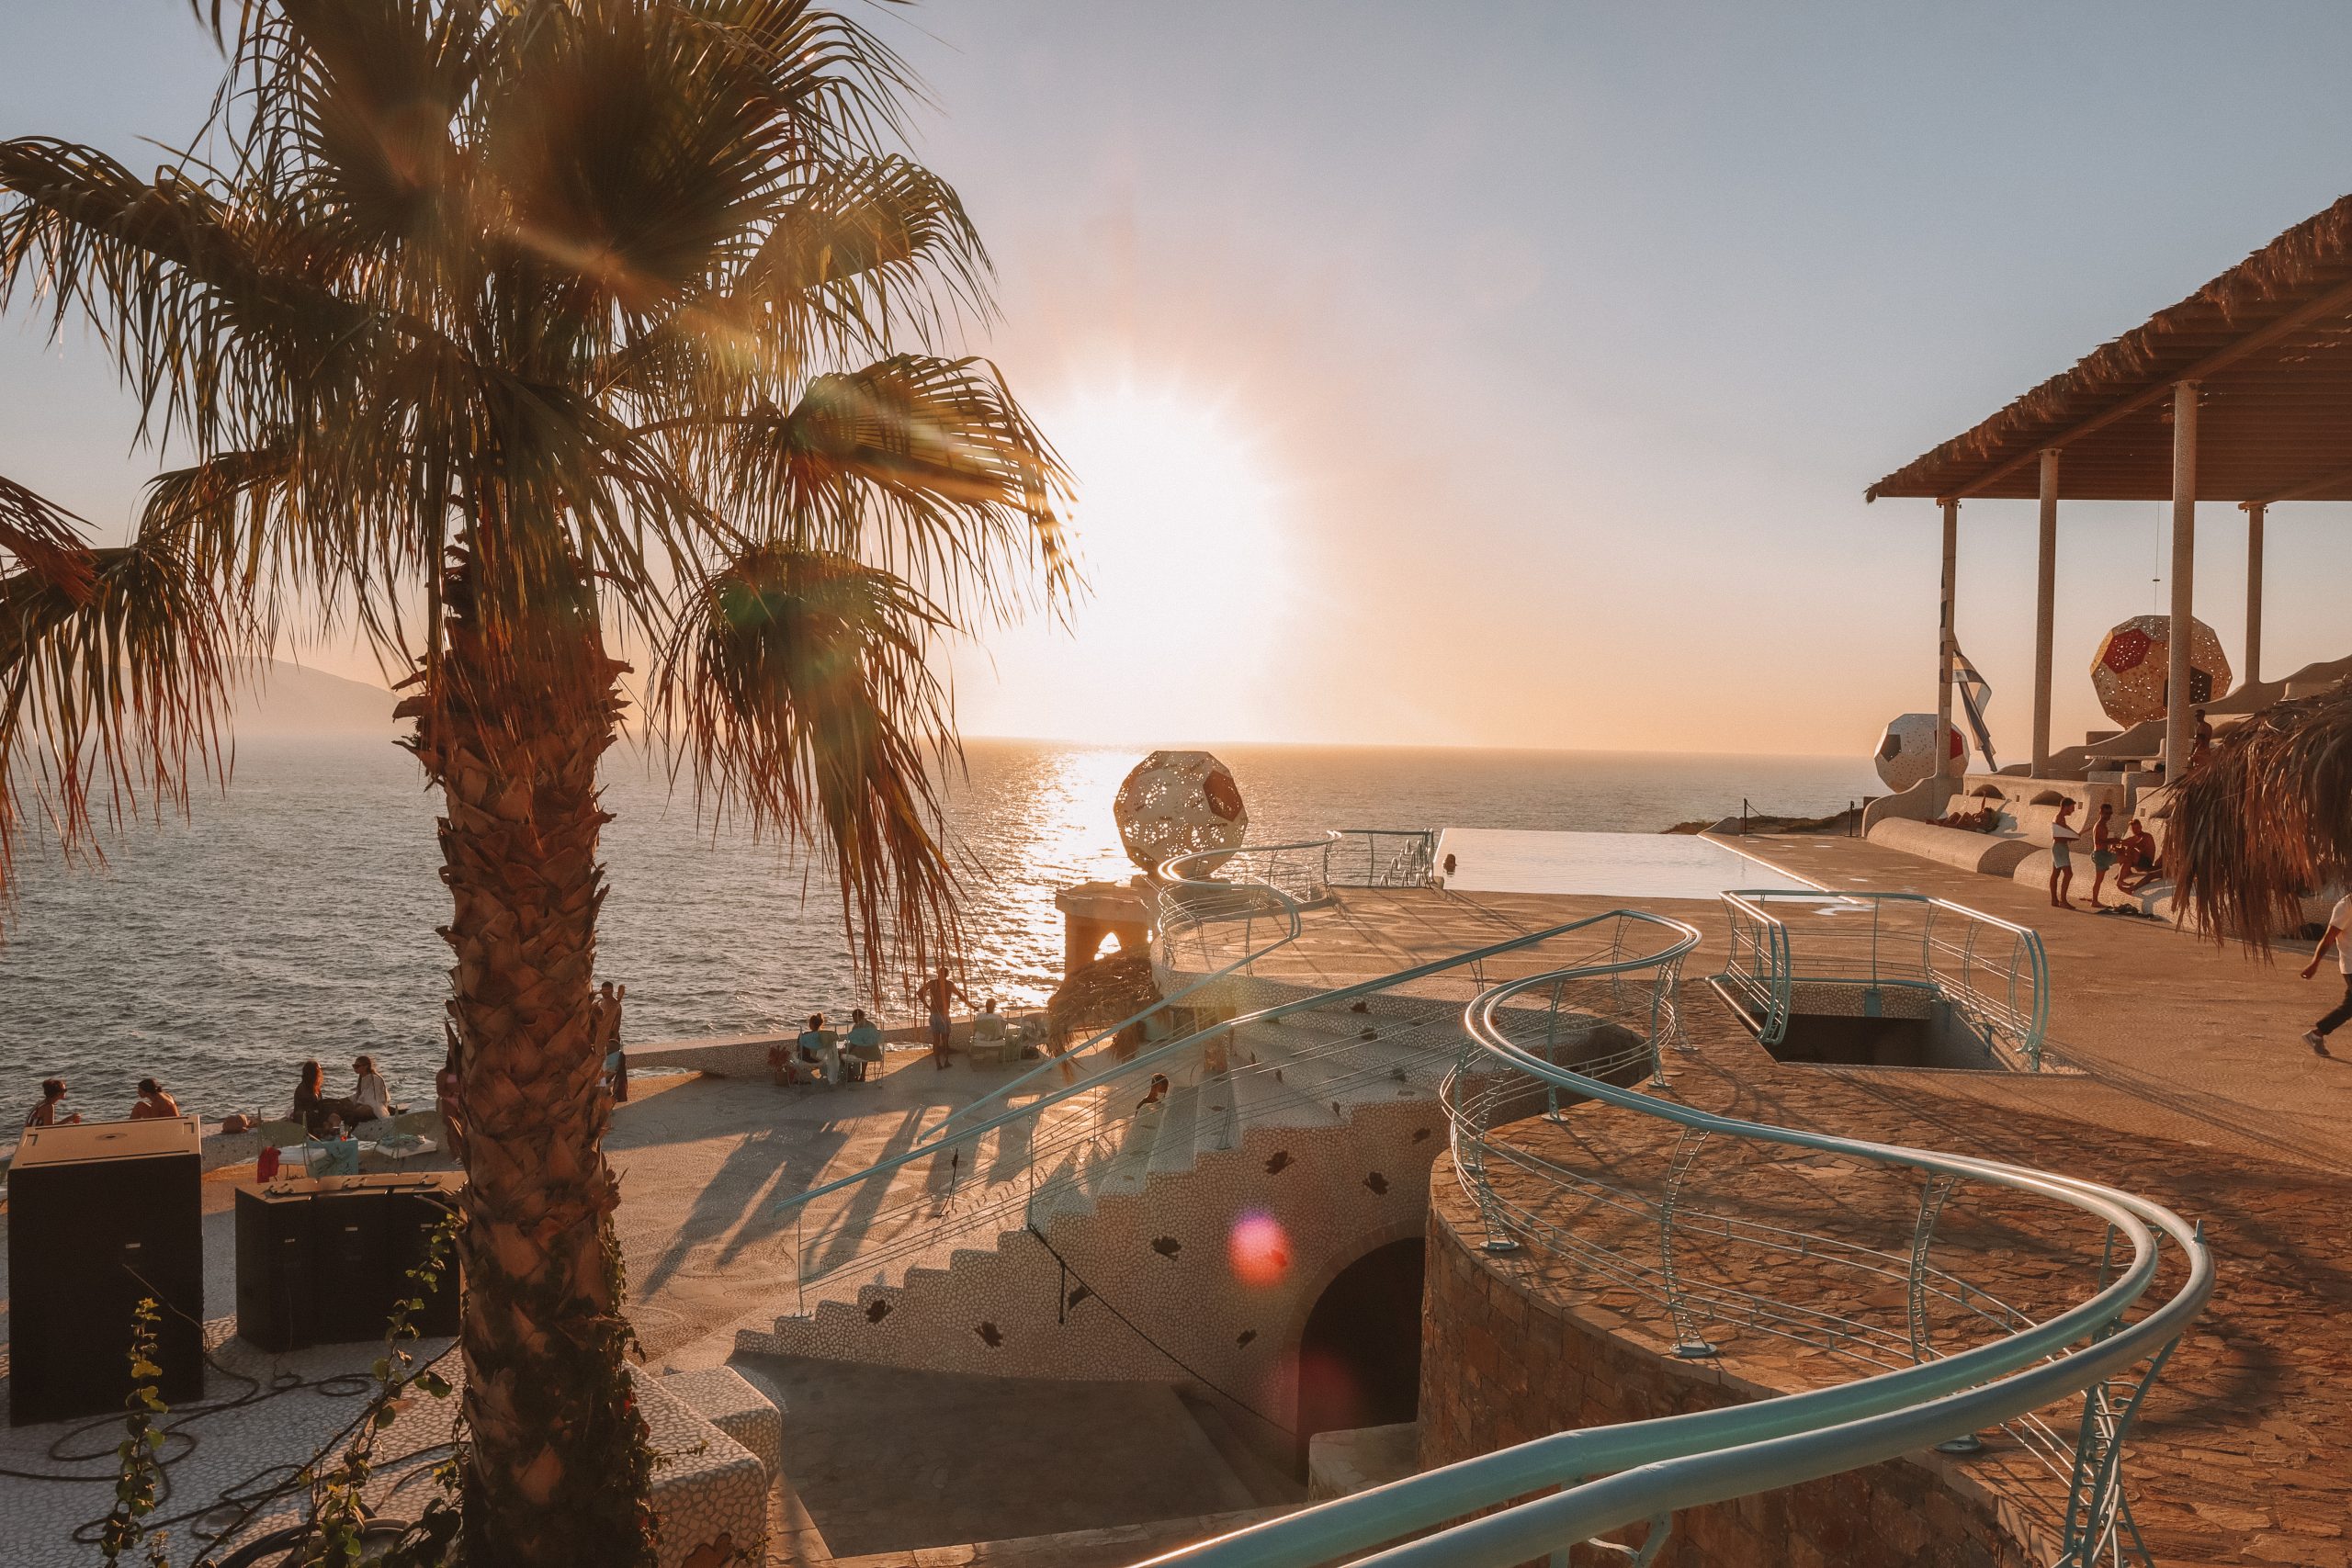 A palm tree and a beach club with the sun setting in the background. Things to see in Ios, Pathos lounge